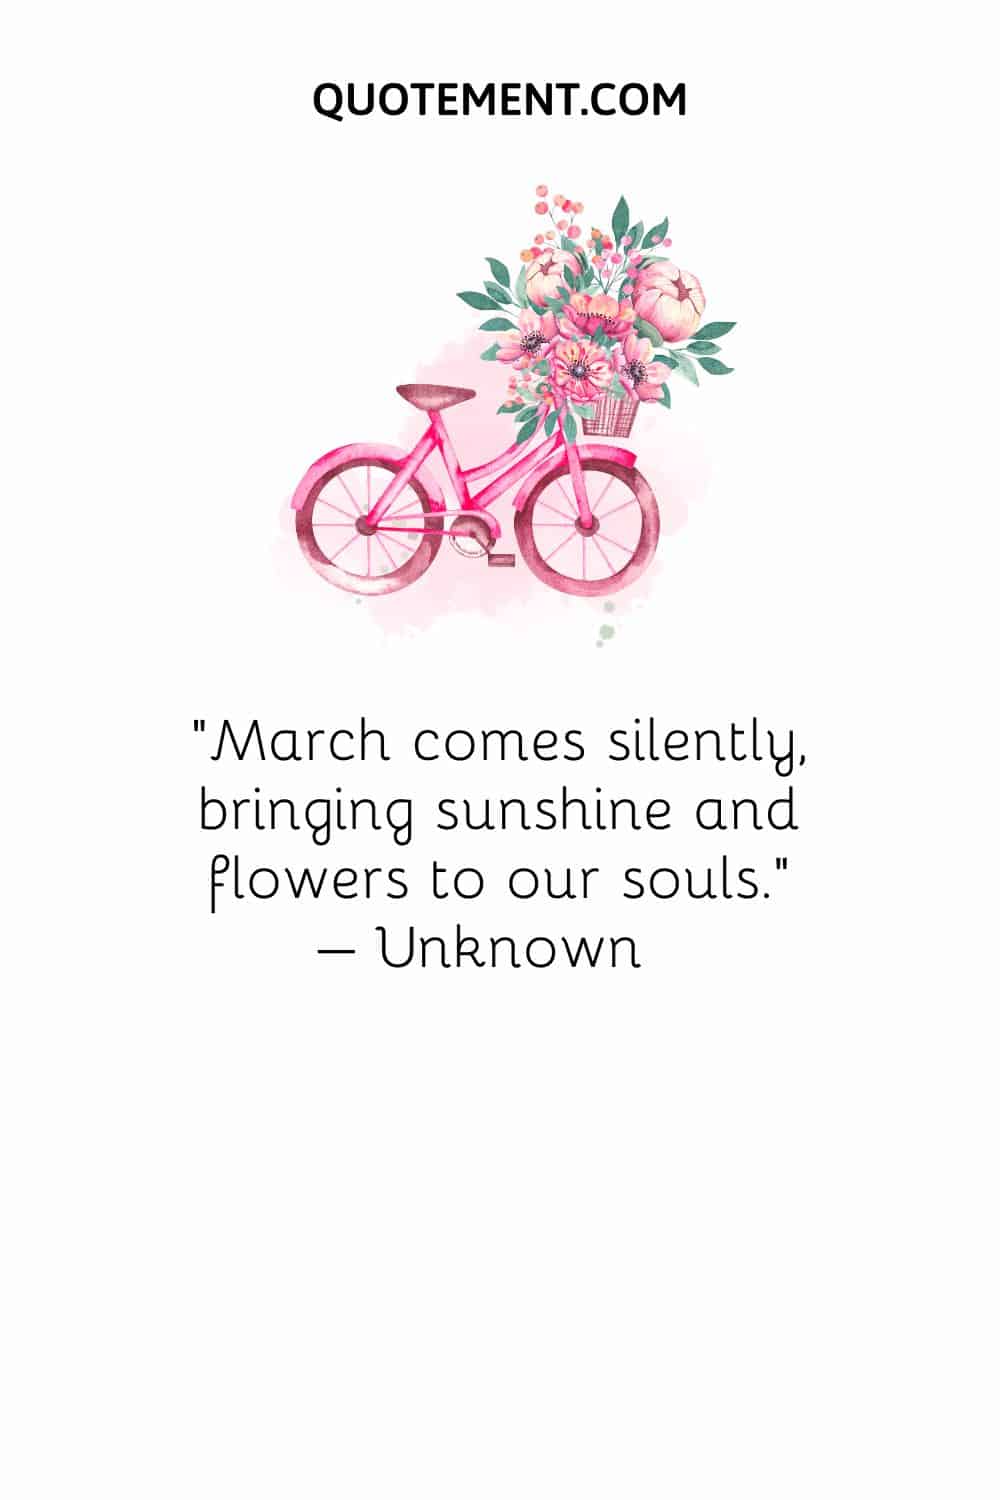 March comes silently, bringing sunshine and flowers to our souls. – Unknown